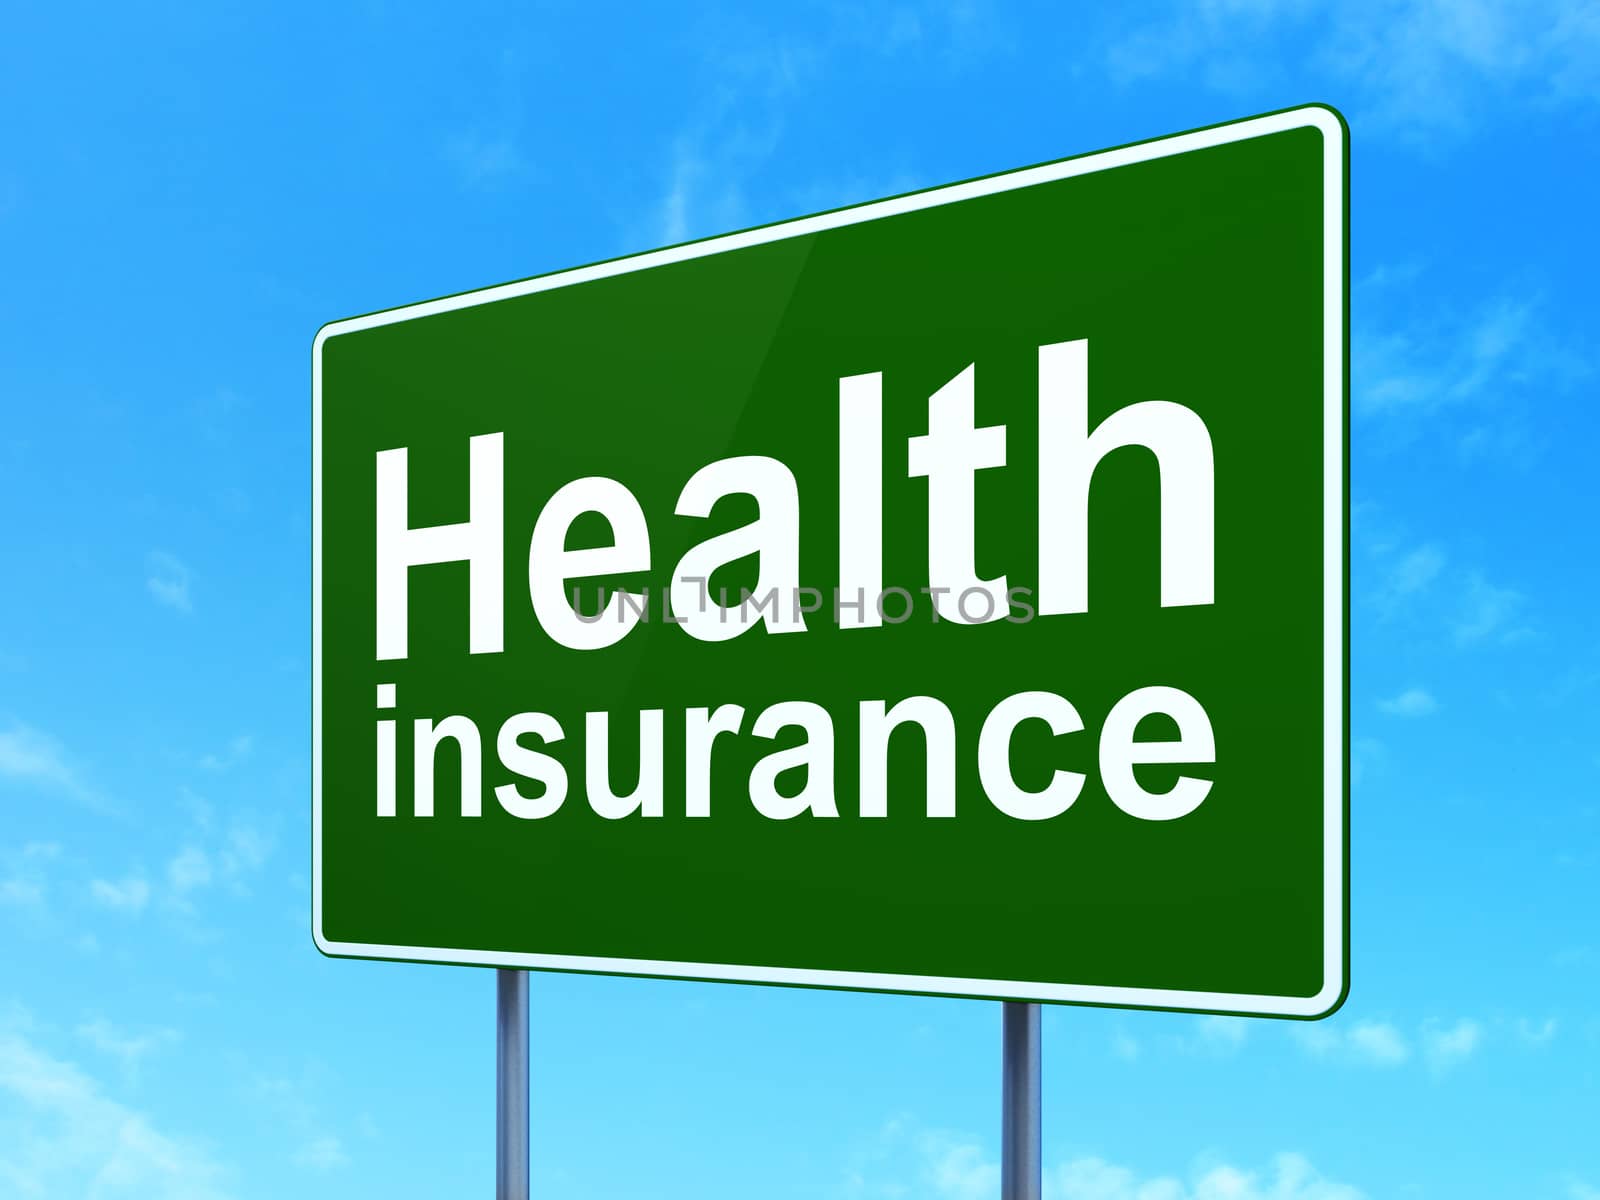 Insurance concept: Health Insurance on green road highway sign, clear blue sky background, 3D rendering